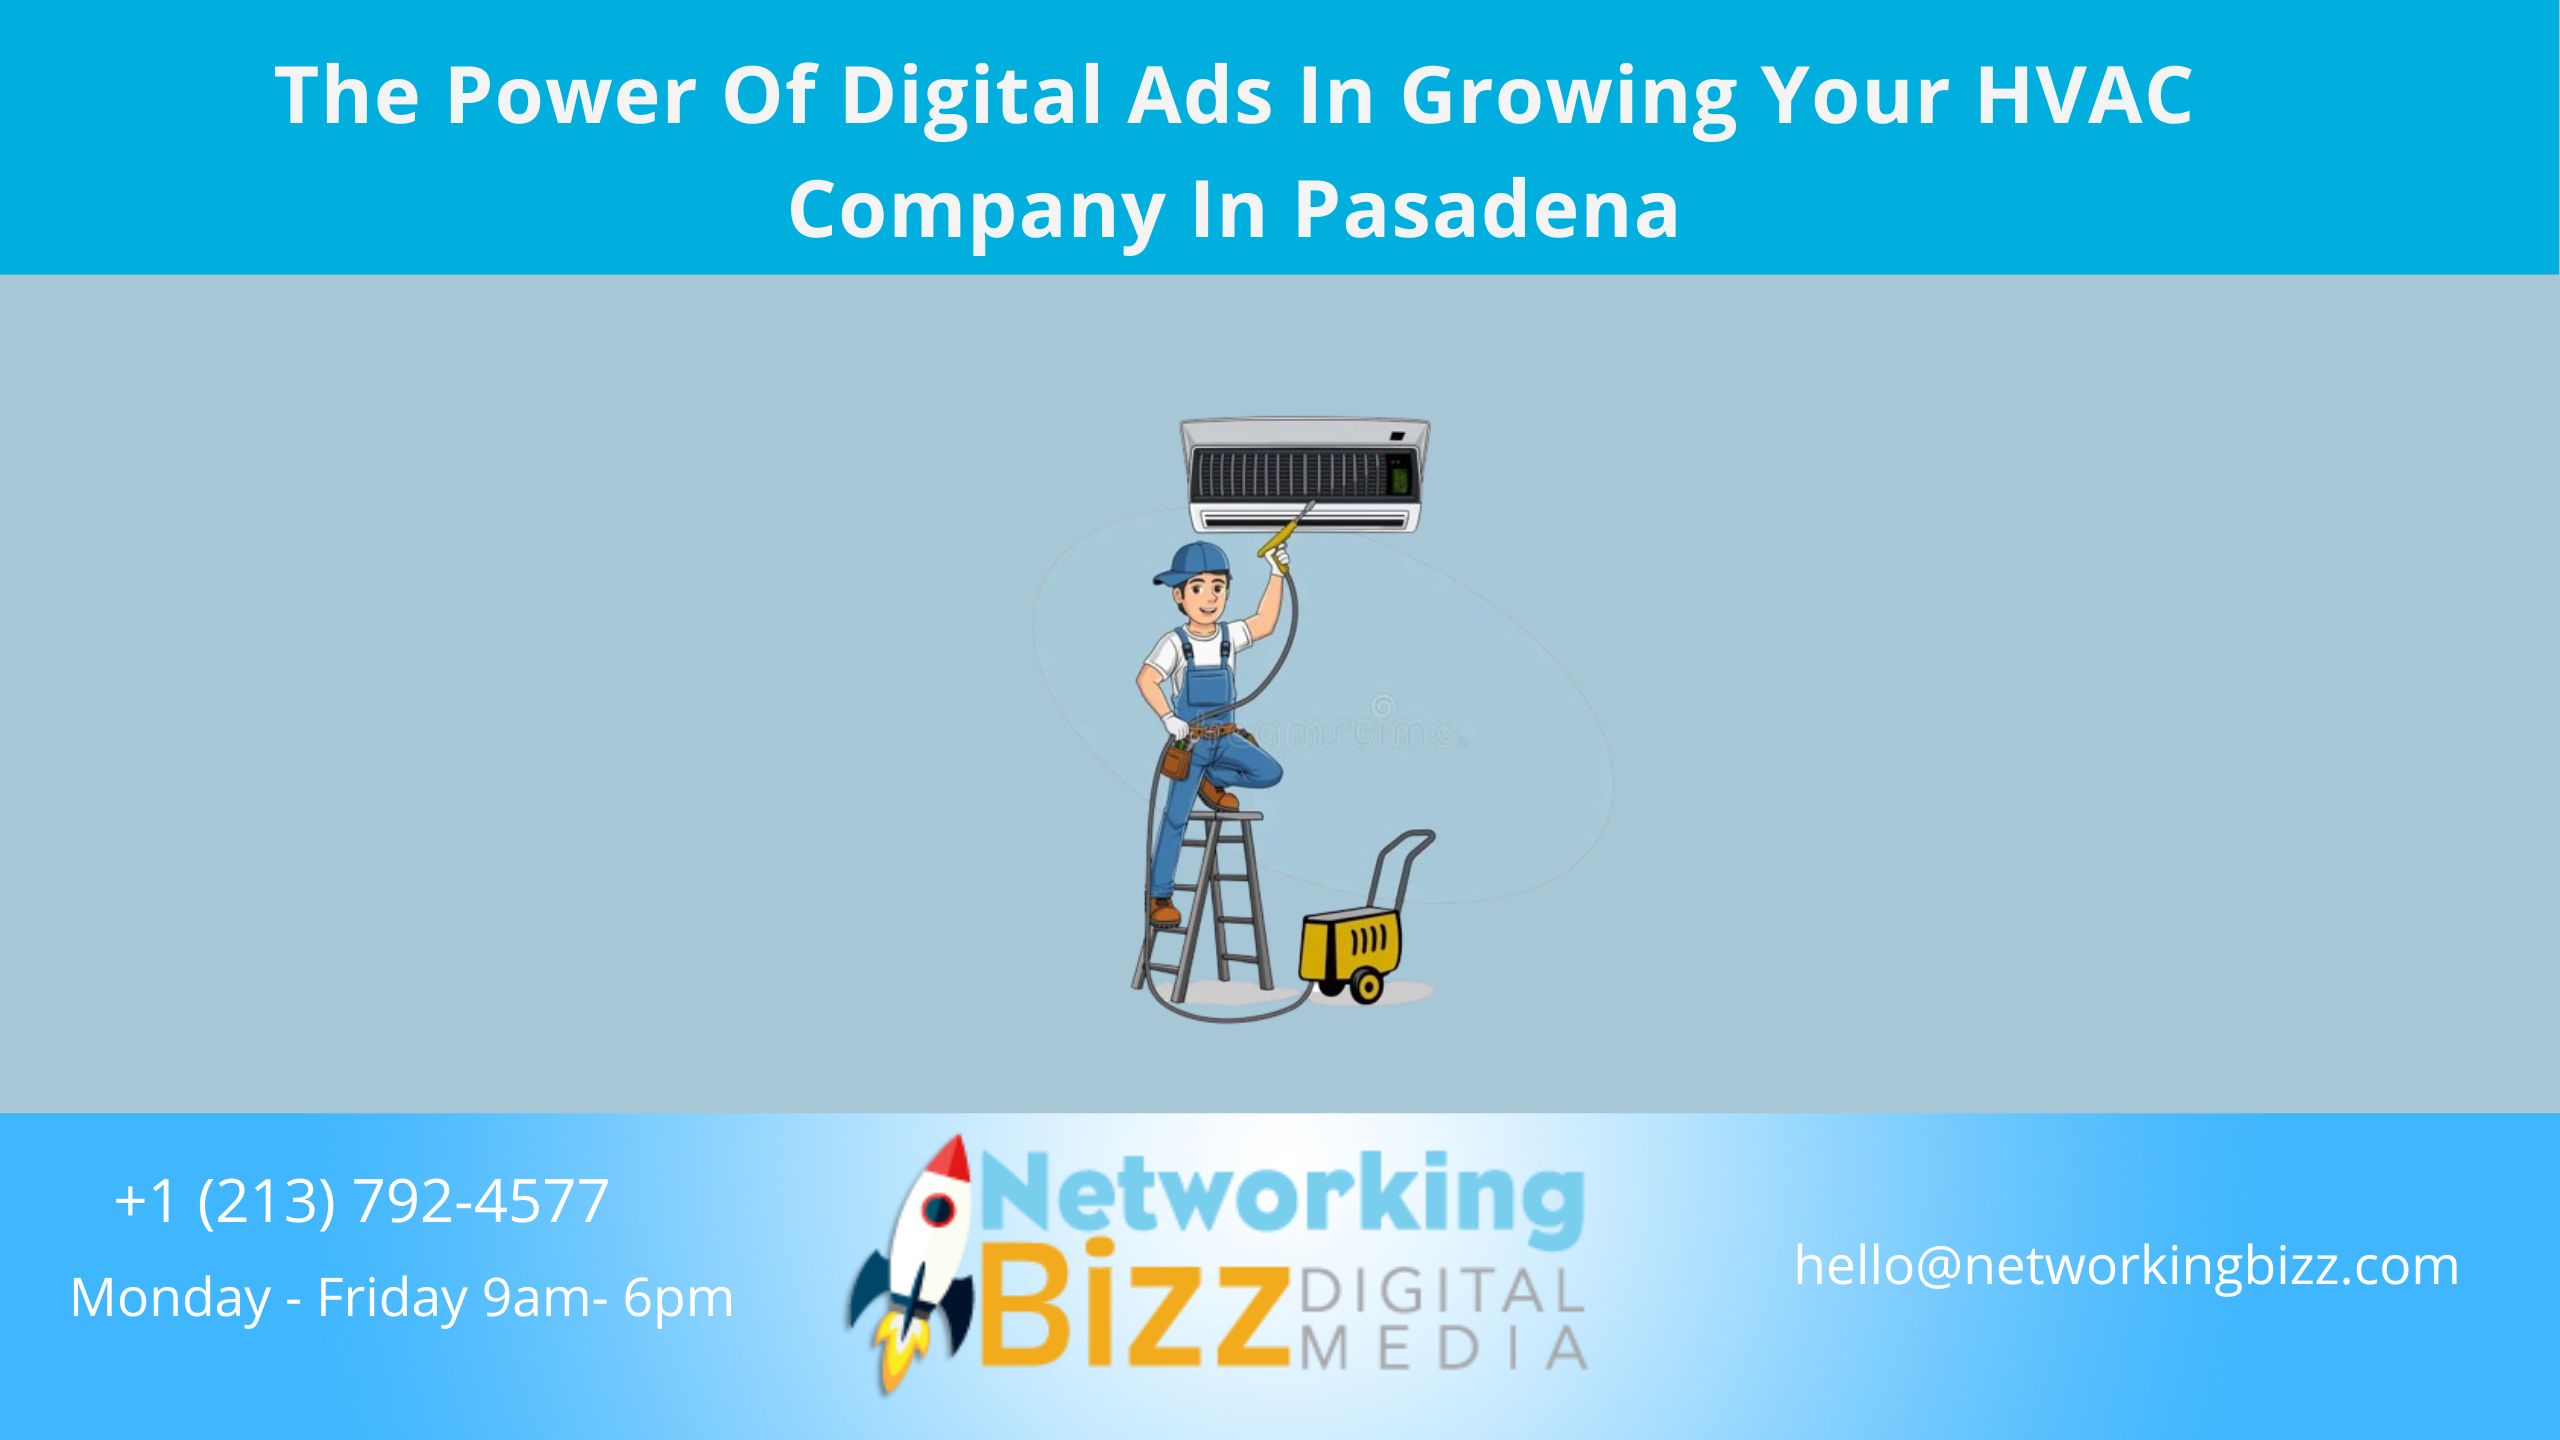 The Power Of Digital Ads In Growing Your HVAC Company In Pasadena